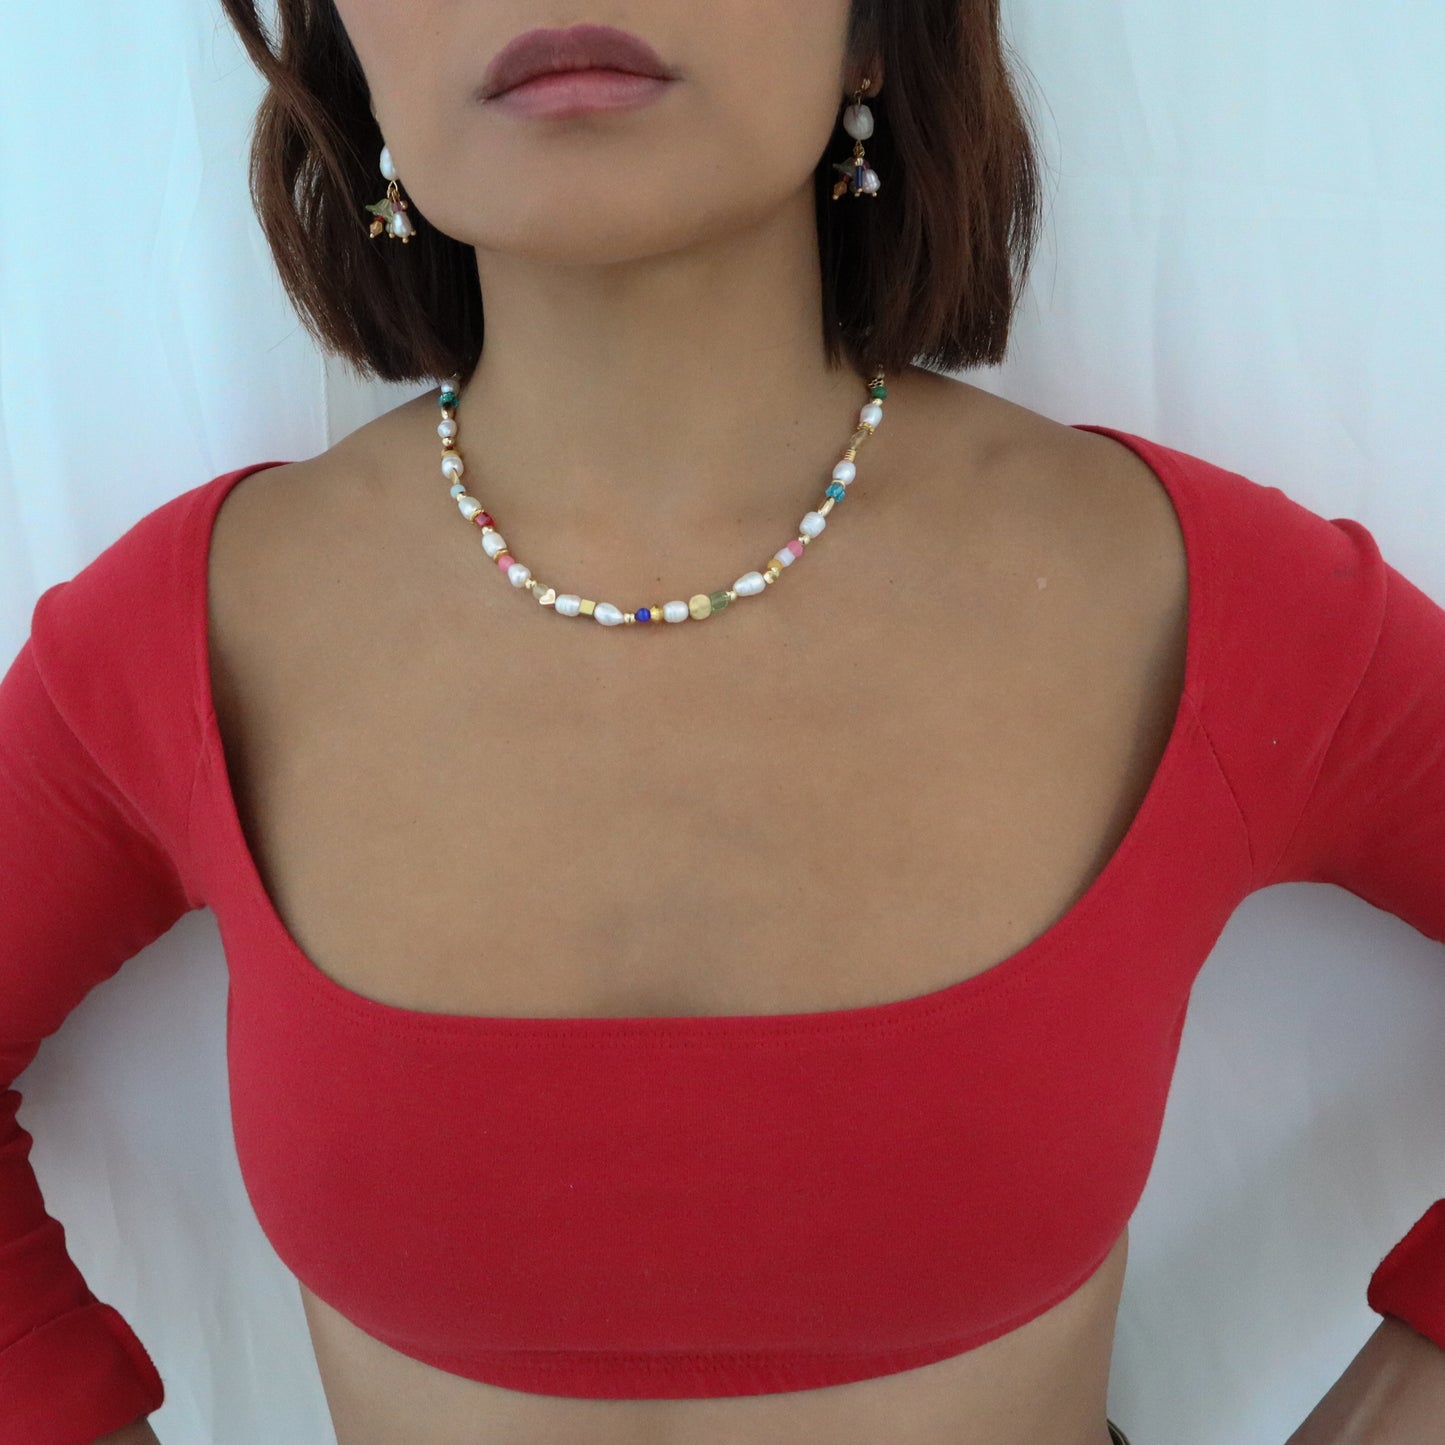 Roop Jewelry Fête Necklace. Holiday party necklace made in Oakland, Ca. Colorful beaded gemstone and pearl necklace. 